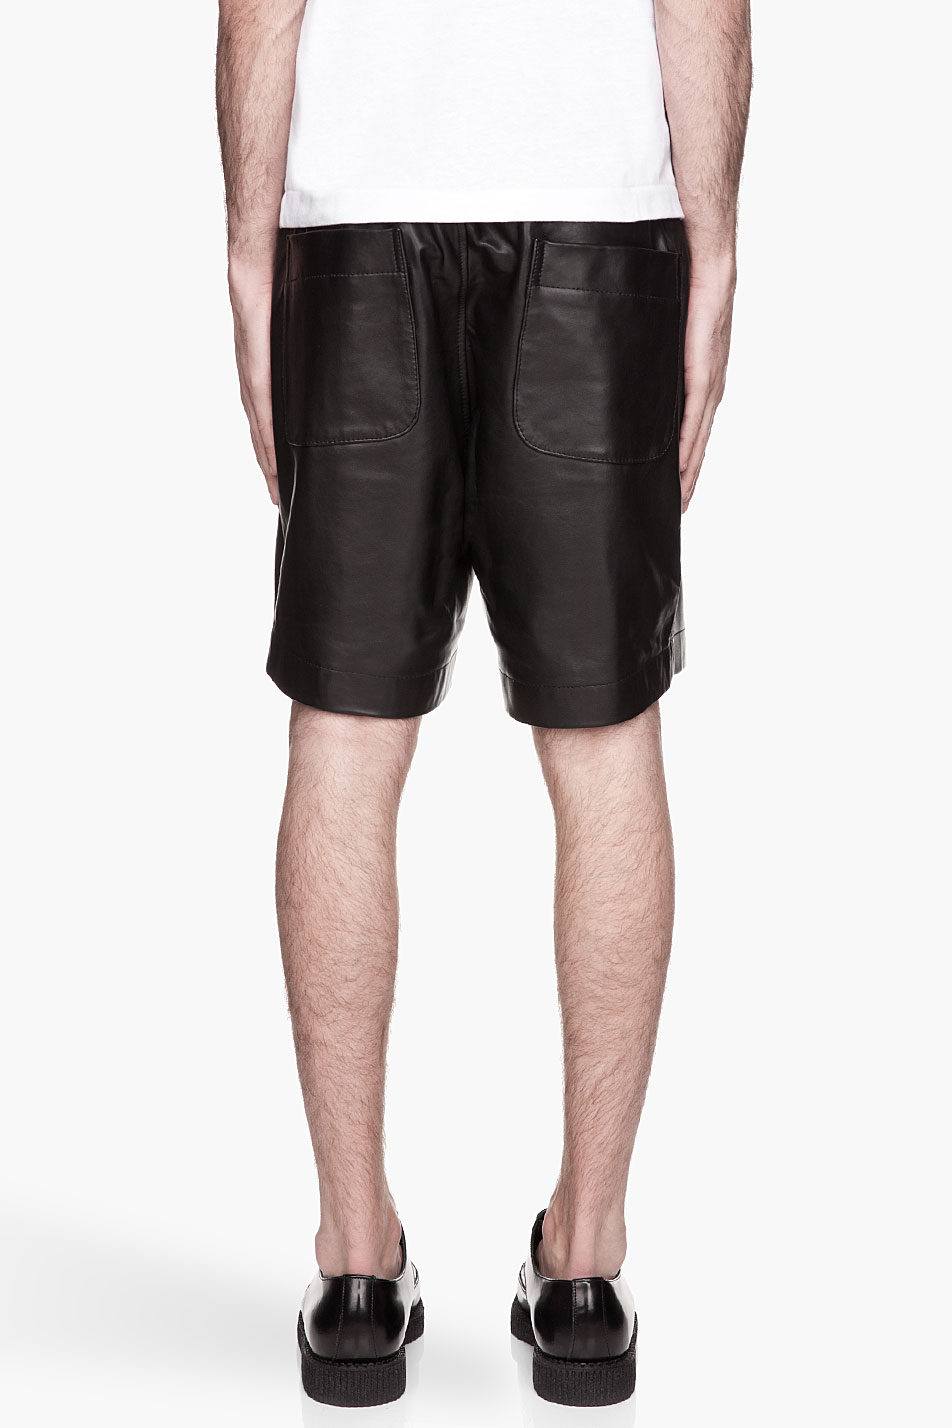 Lyst - Surface to air Black Buffed Leather Boxing Shorts in Black for Men